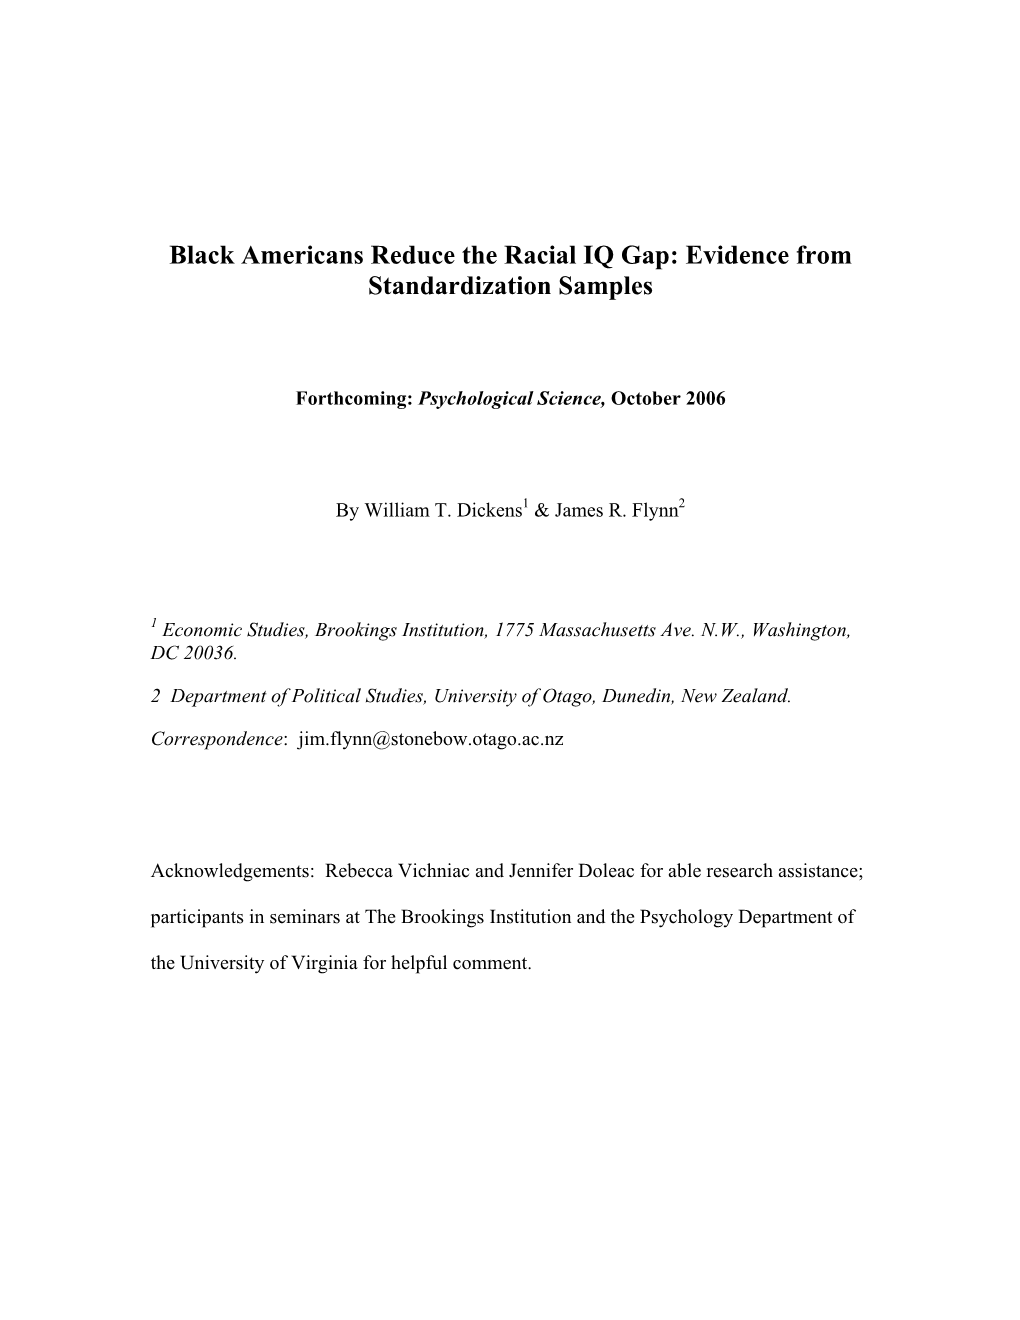 Black Americans Reduce the Racial IQ Gap: Evidence from Standardization Samples